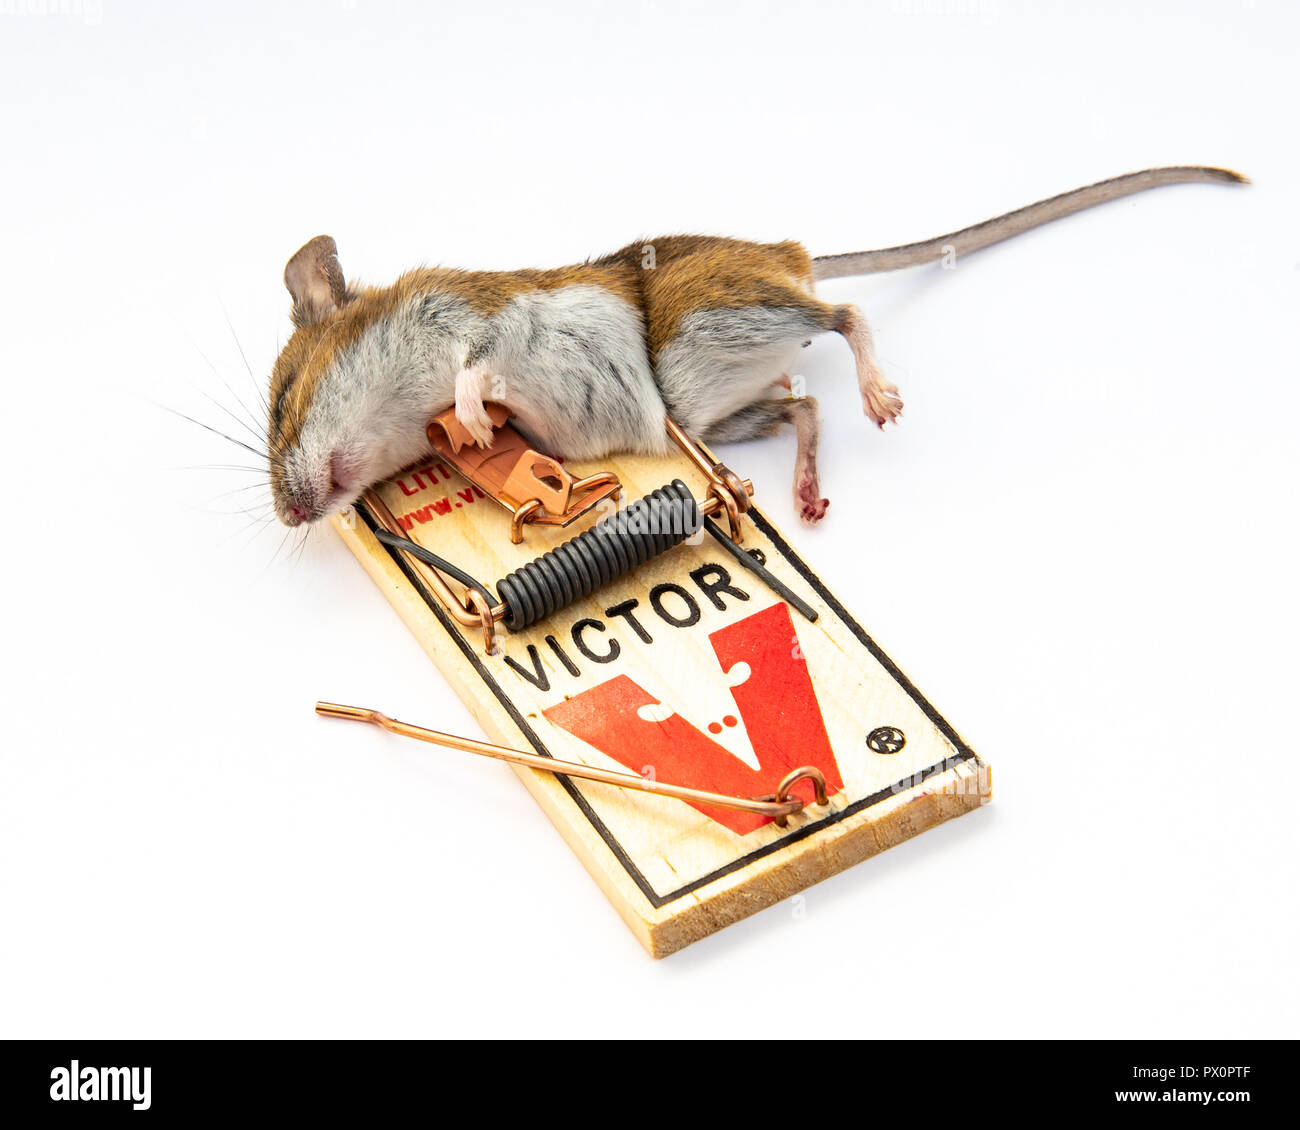 The Victor mouse traps logo looks interesting when upside down :  r/AccidentalRacism